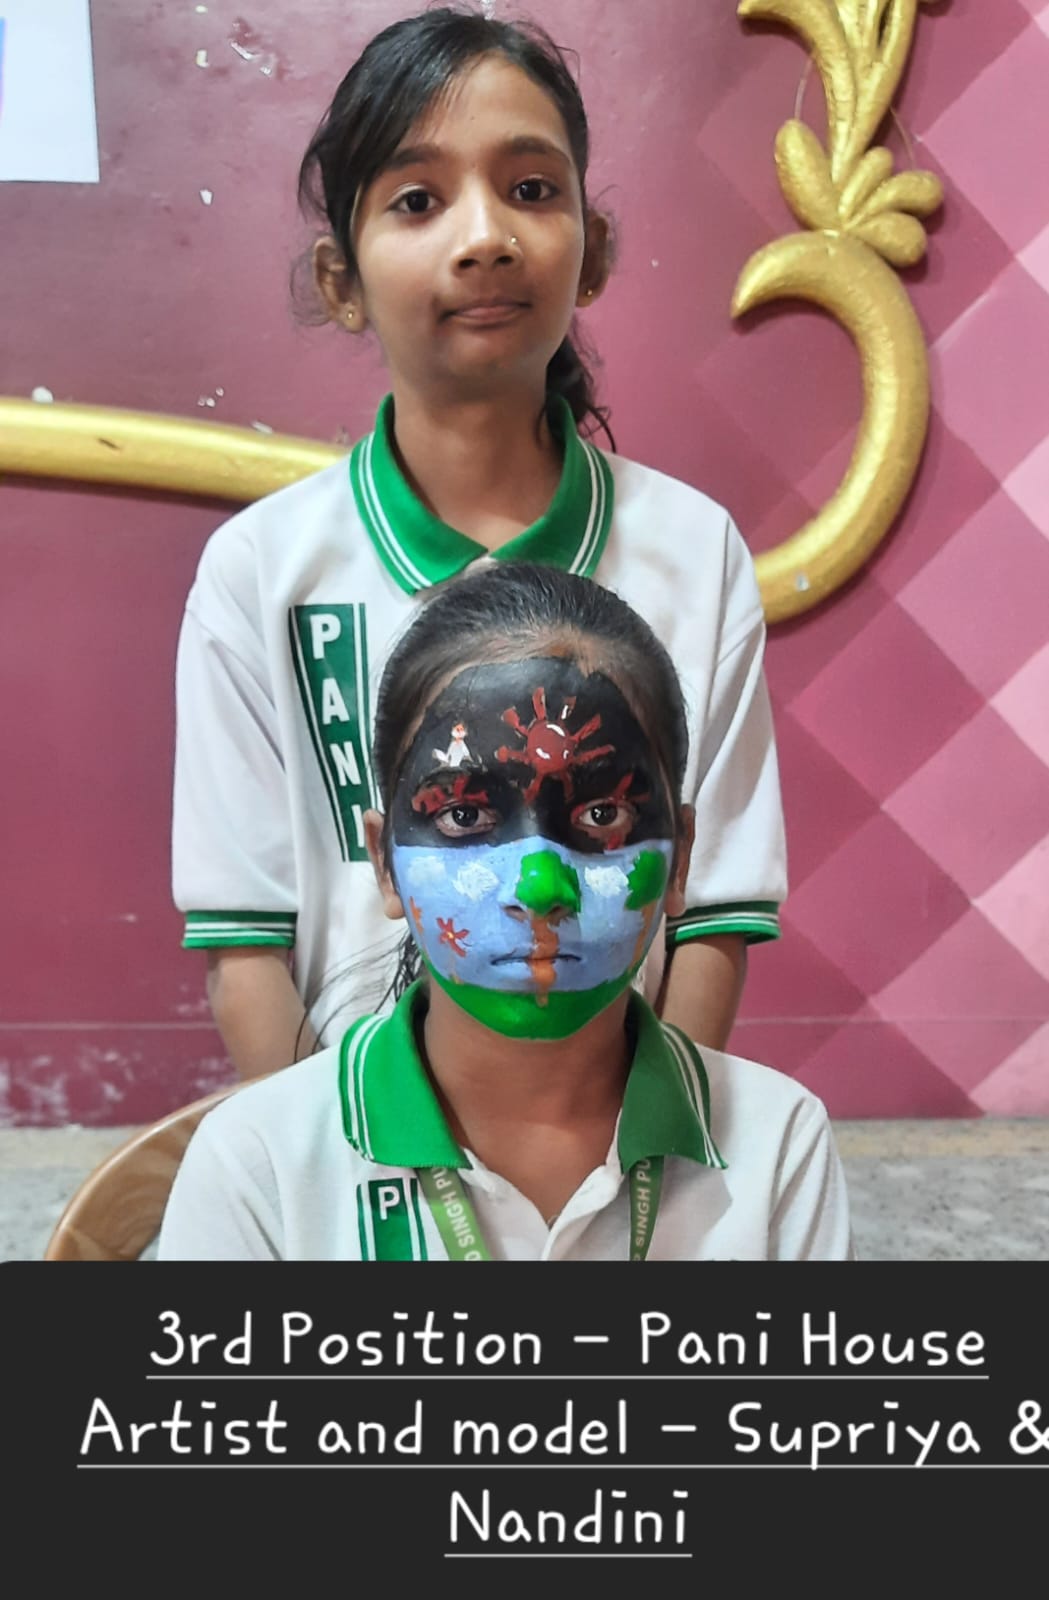 Inter House Face Painting Competition